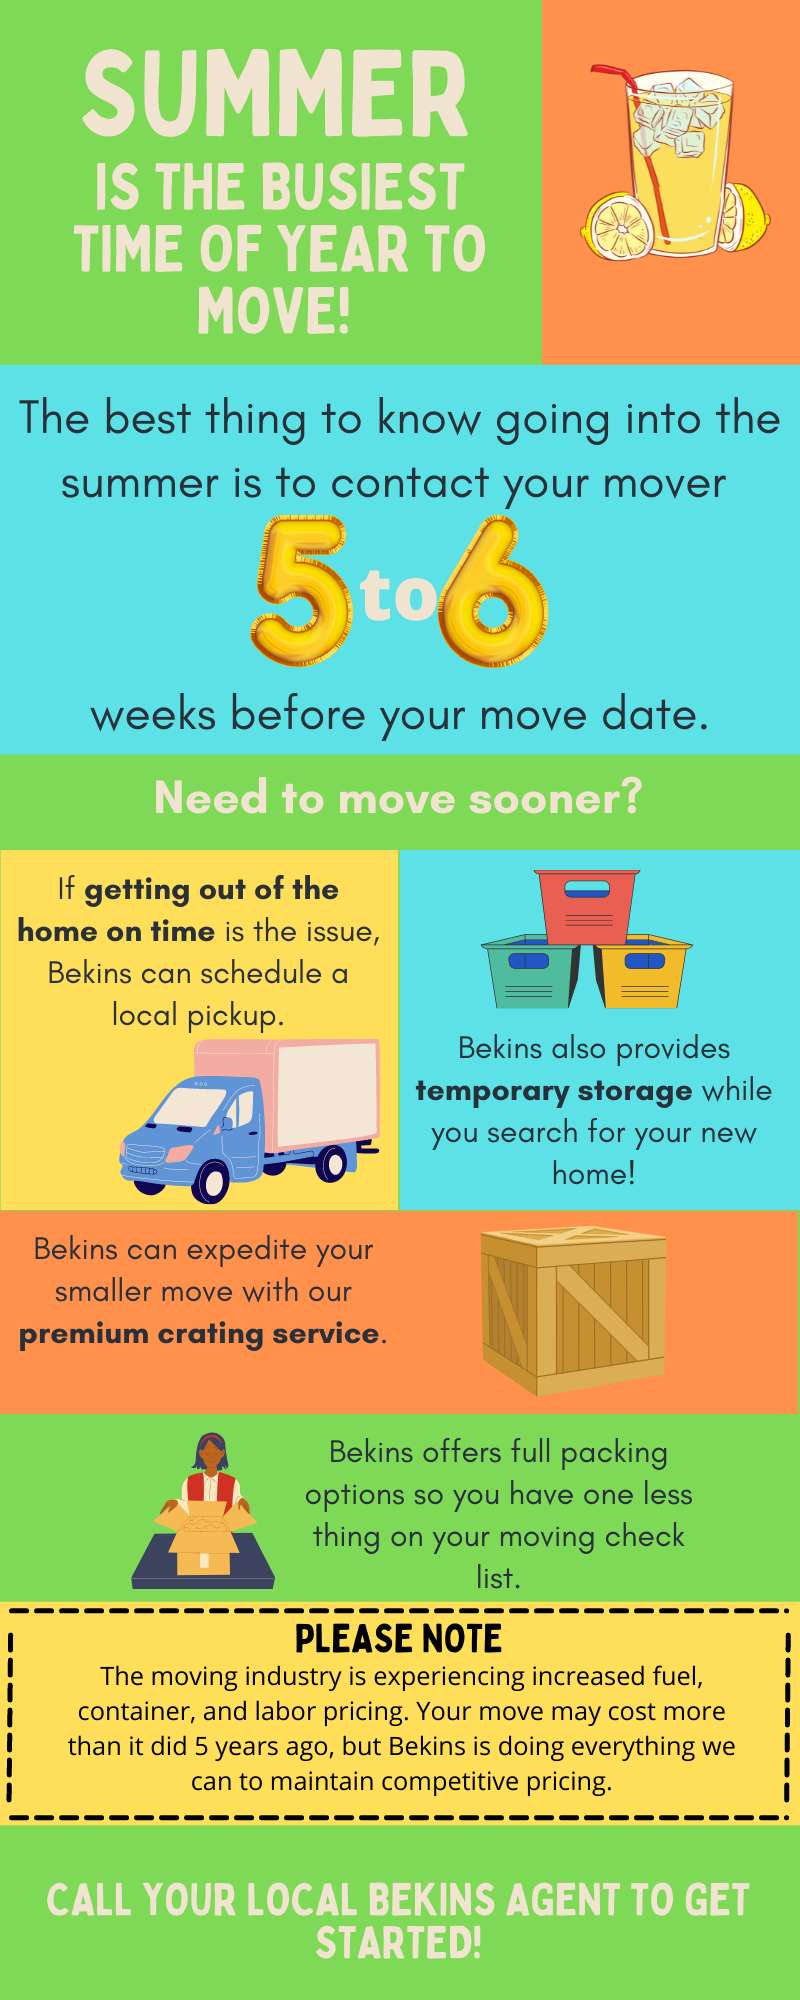 Summer moving infographic conveying the need to contact your mover 5 to 6 weeks beforehand. 